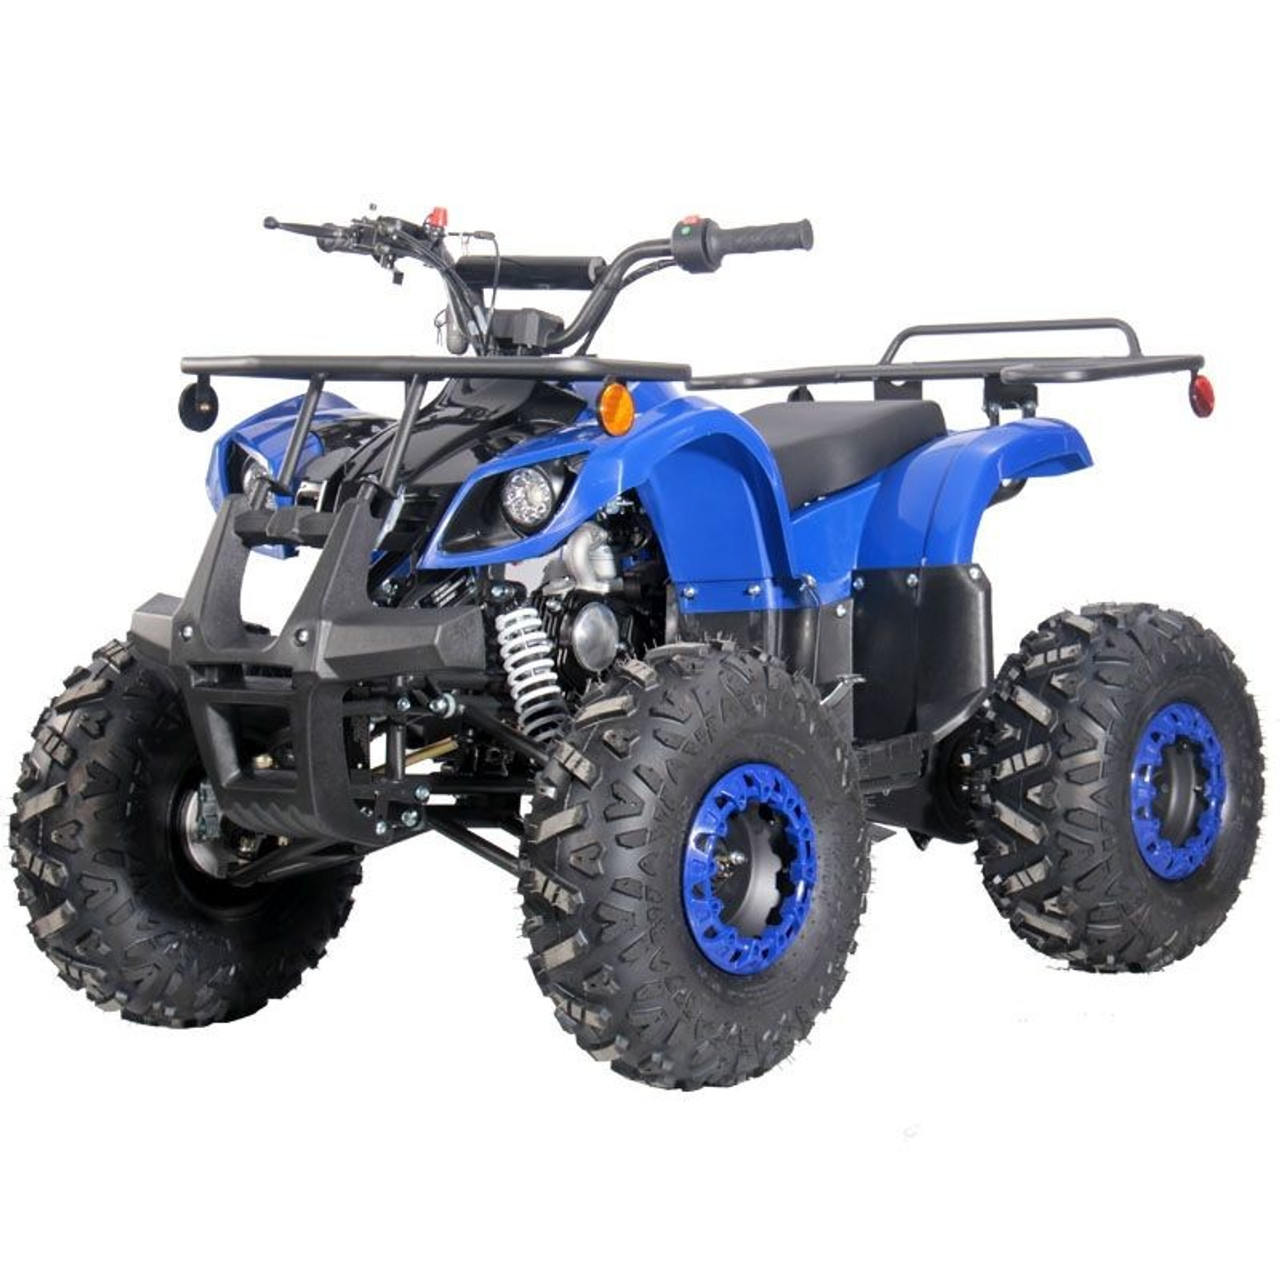 DongFang 125cc (DF125AVC-8A) Kids ATV RFP-Grizzly, Kids/Youth Size,19" Tire, Auto W/Reverse, Foot Brake